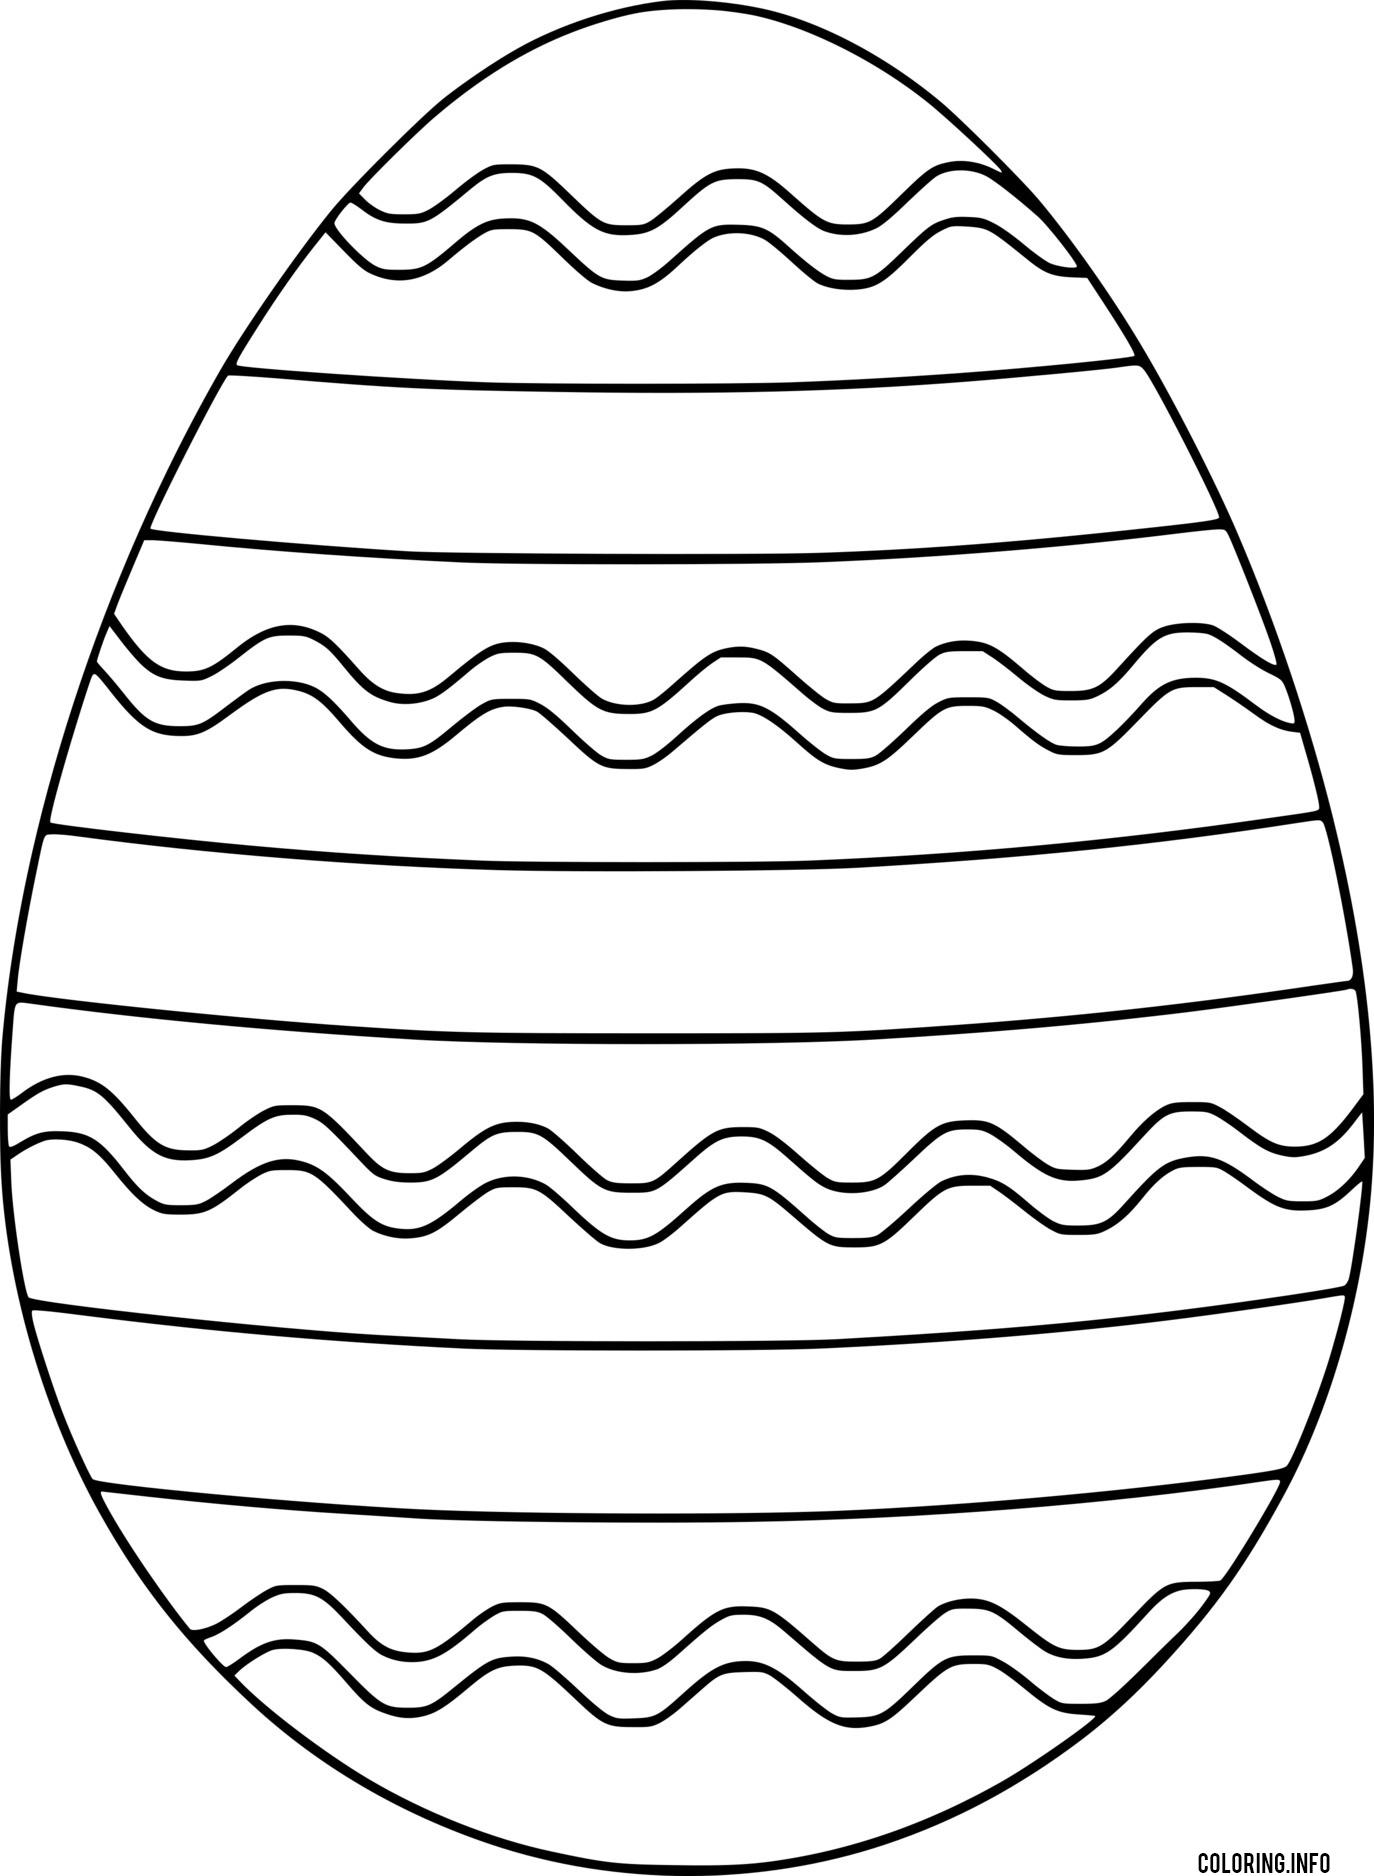 Easter Egg With Line And Wave Lines coloring